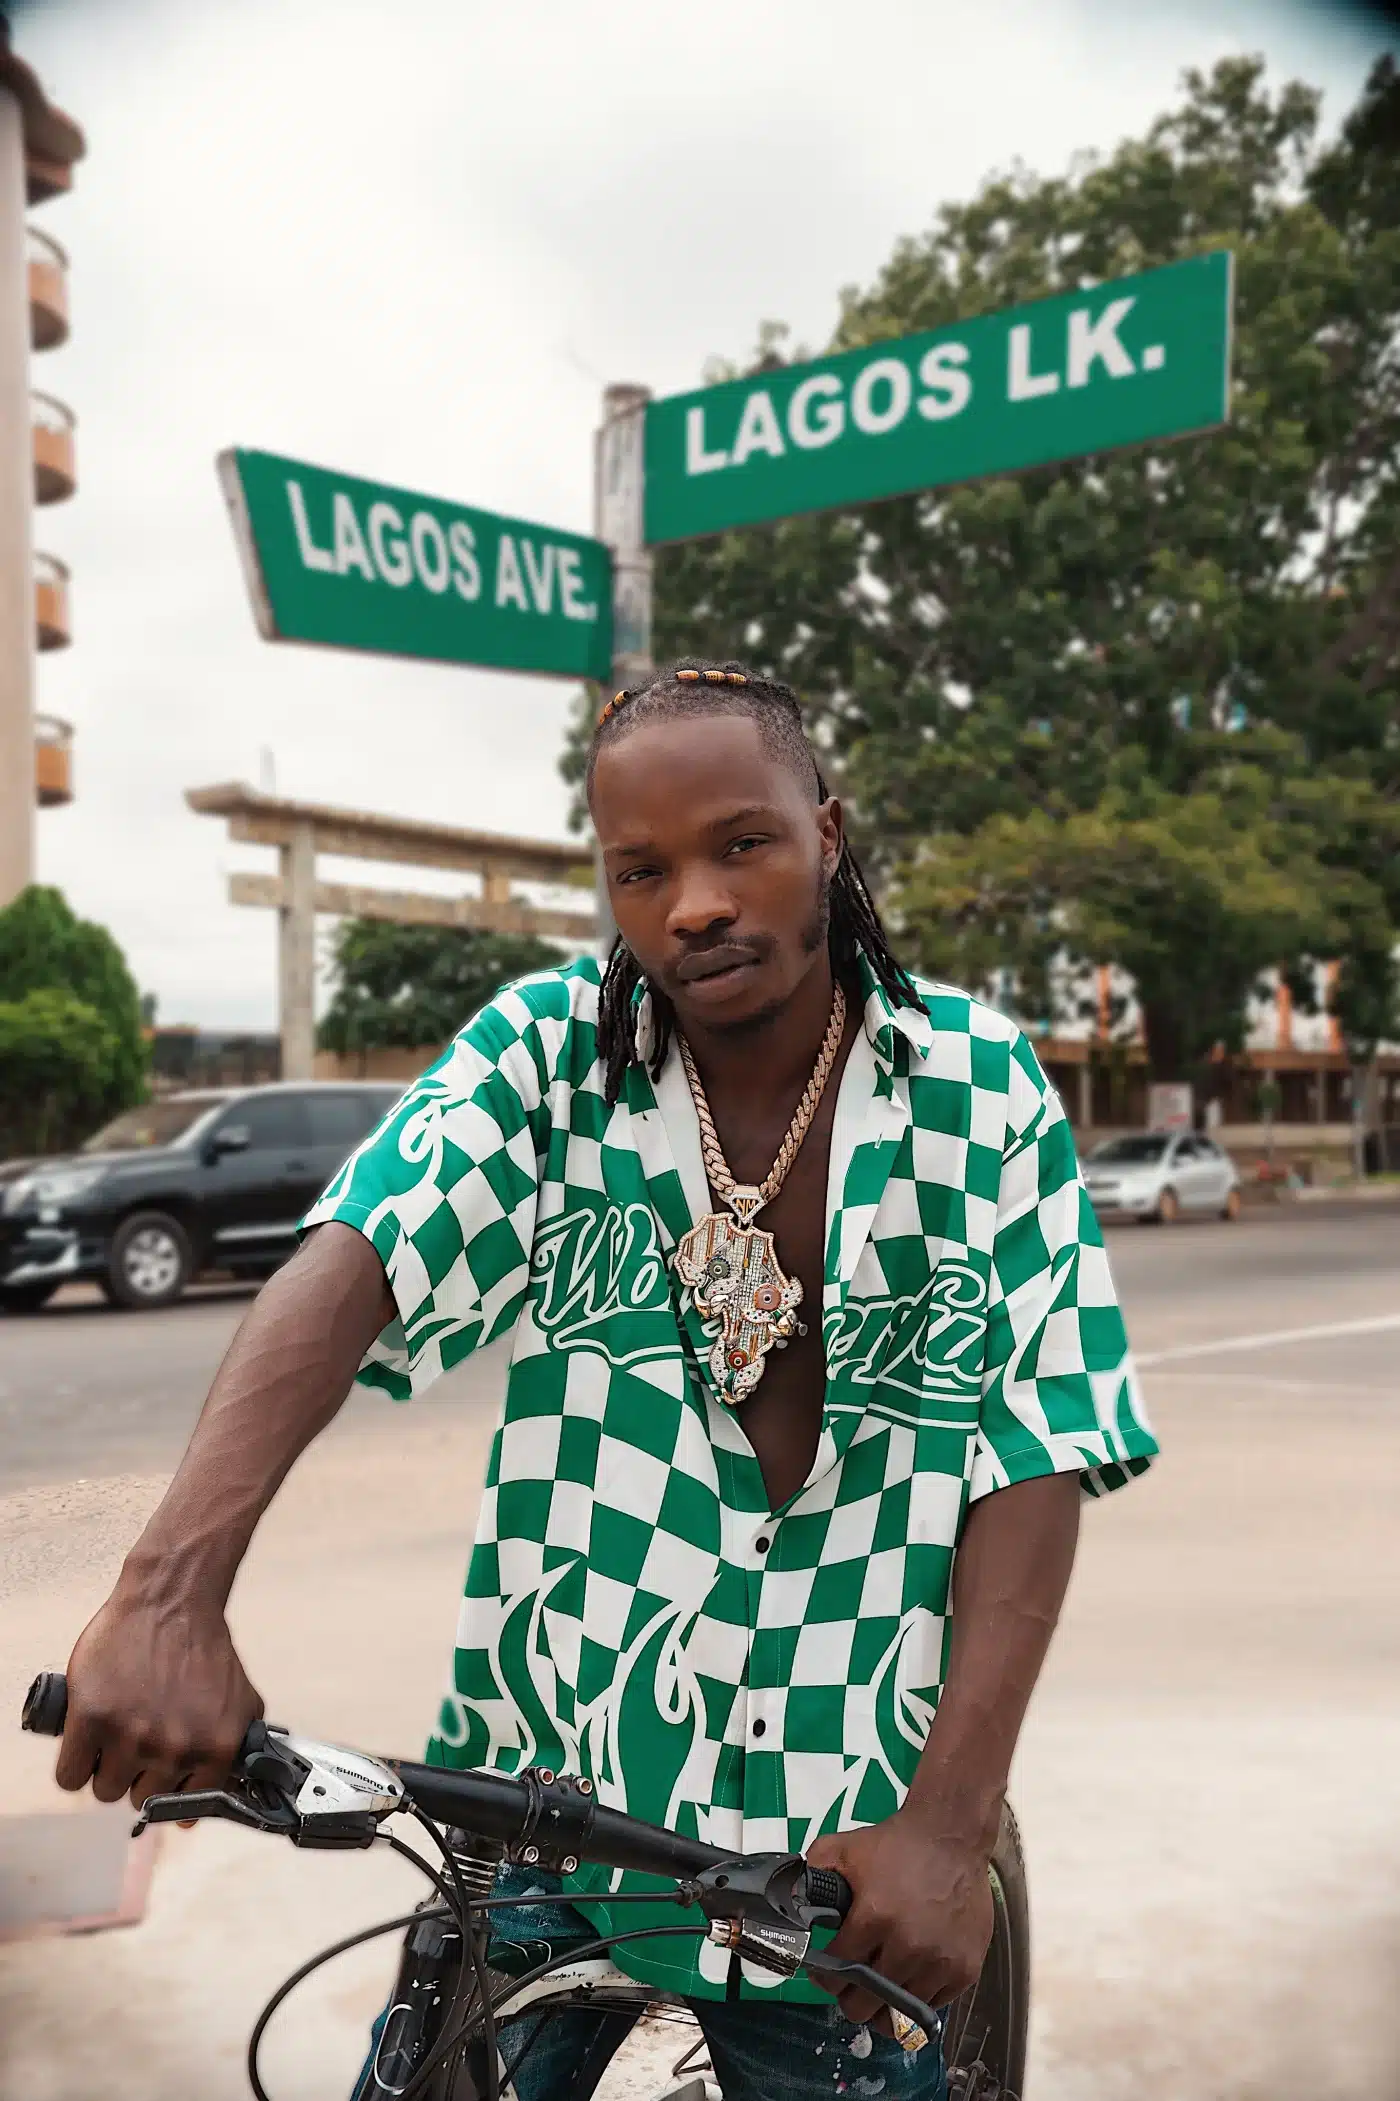 “I’ve been arrested 124 times in UK” – Throwback video of Naira Marley surfaces